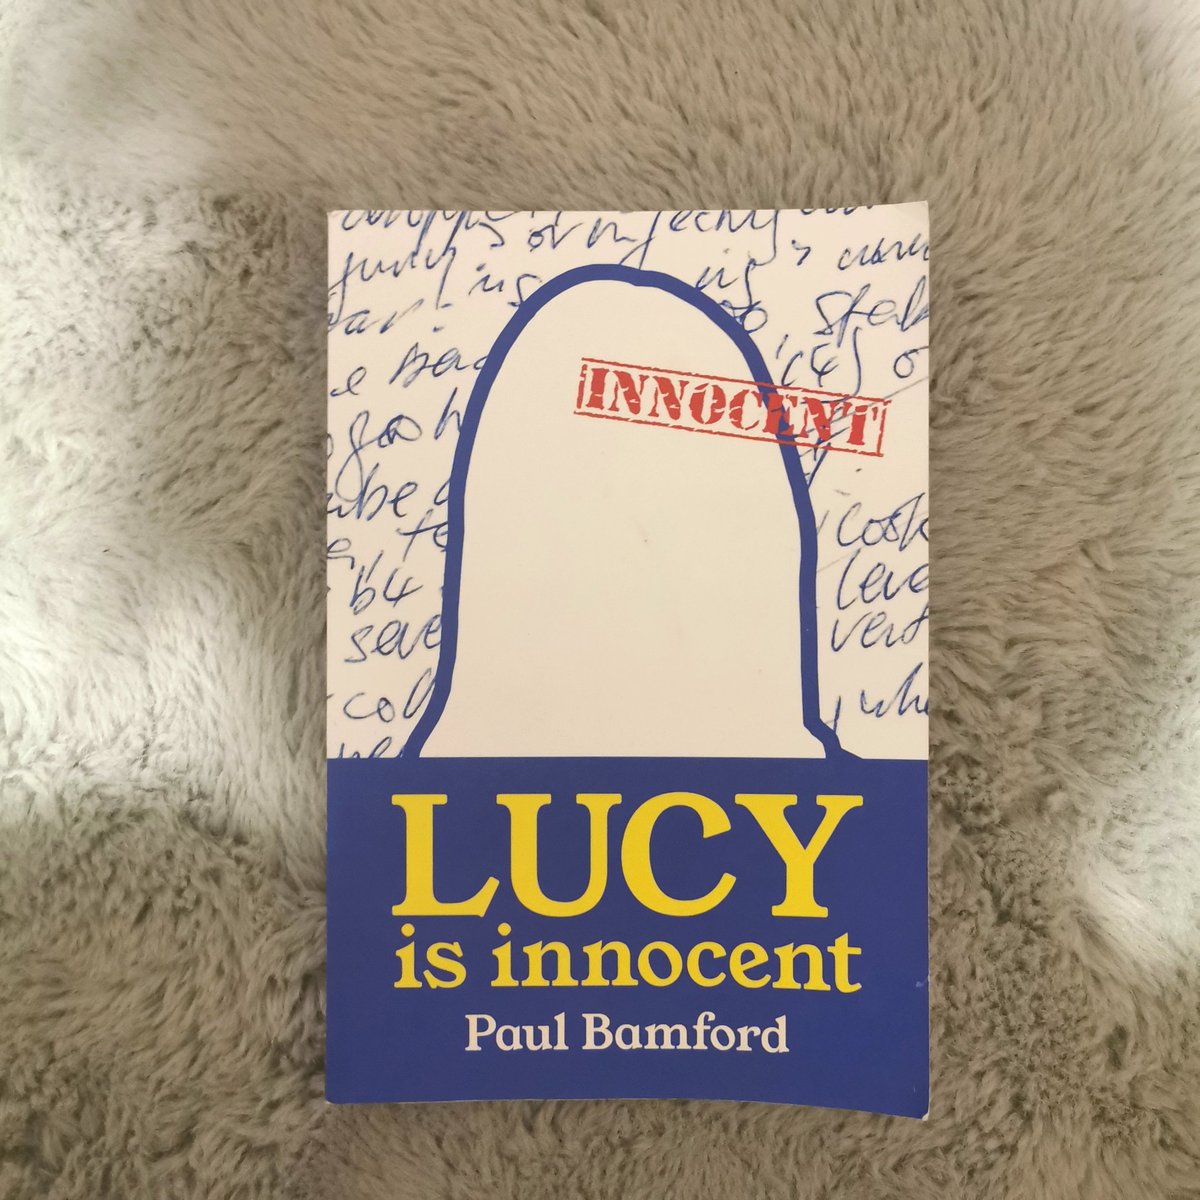 A bit of light reading.

Not to everyone's taste I'm sure, but I am intrigued what evidence this will explore...

#LucyLetby #Truecrime #BookTwitter